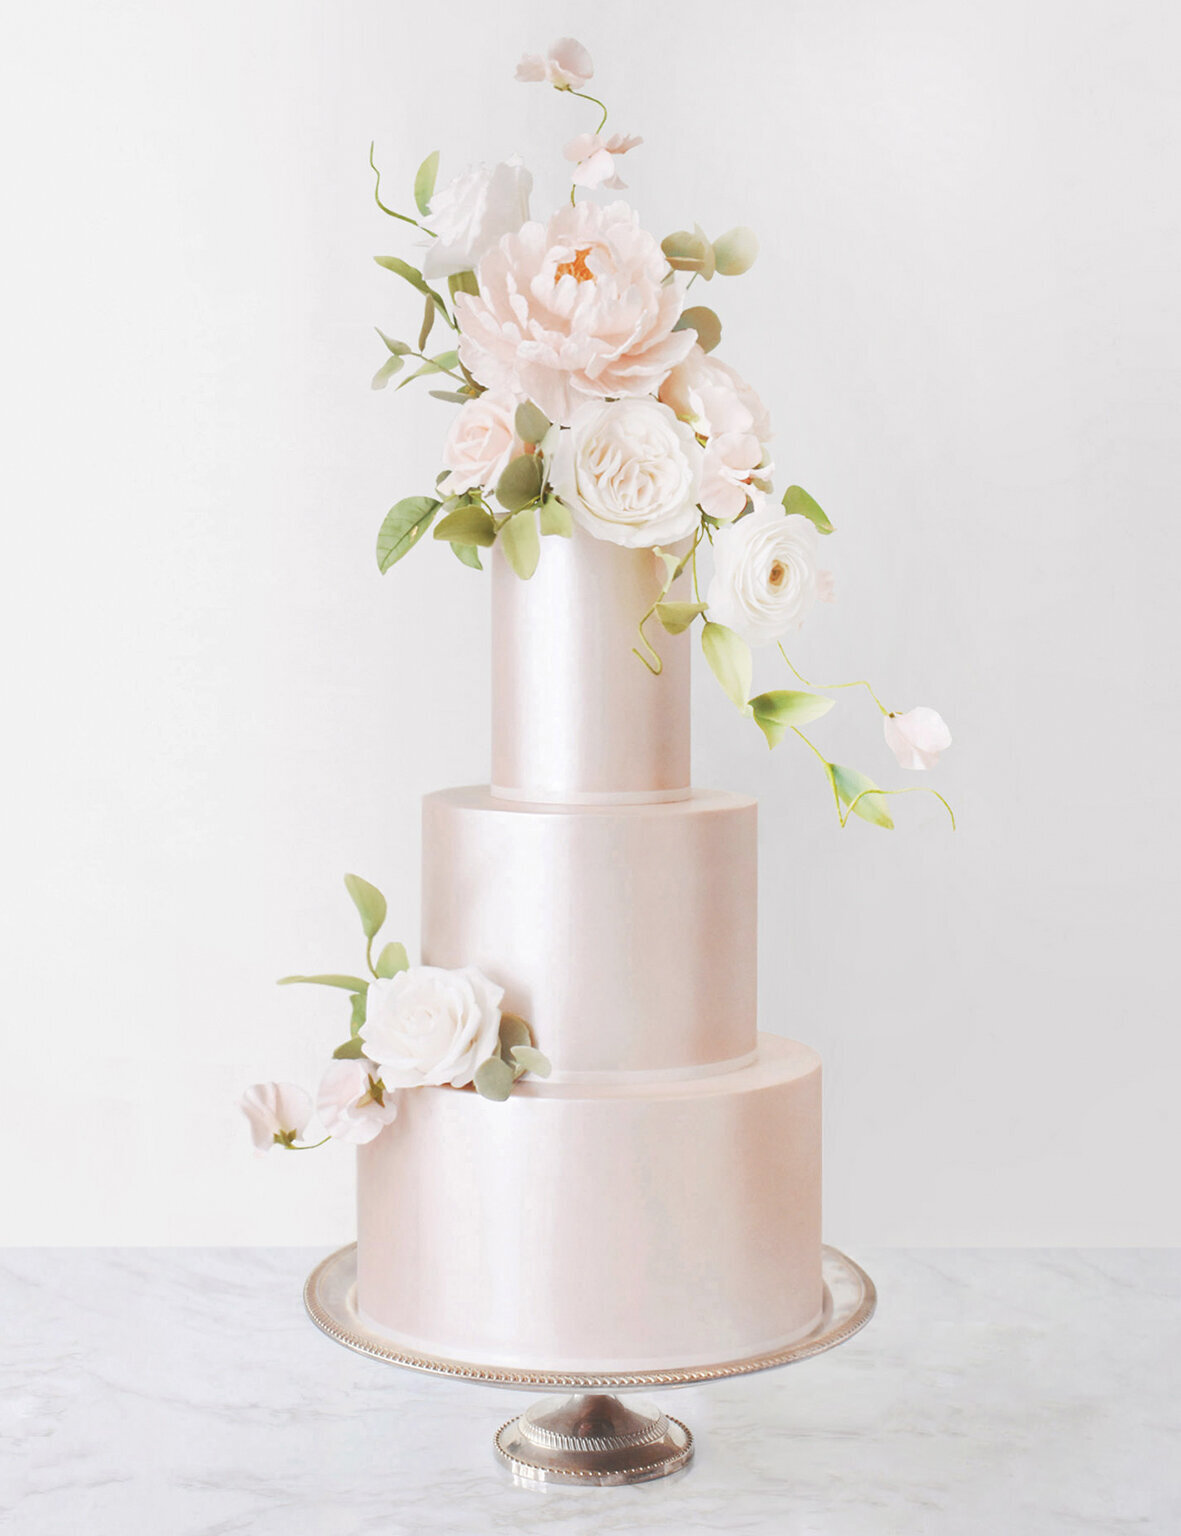 An elegant pale pink wedding cake with a shiny satin finish and pale pink sugar flowers on top